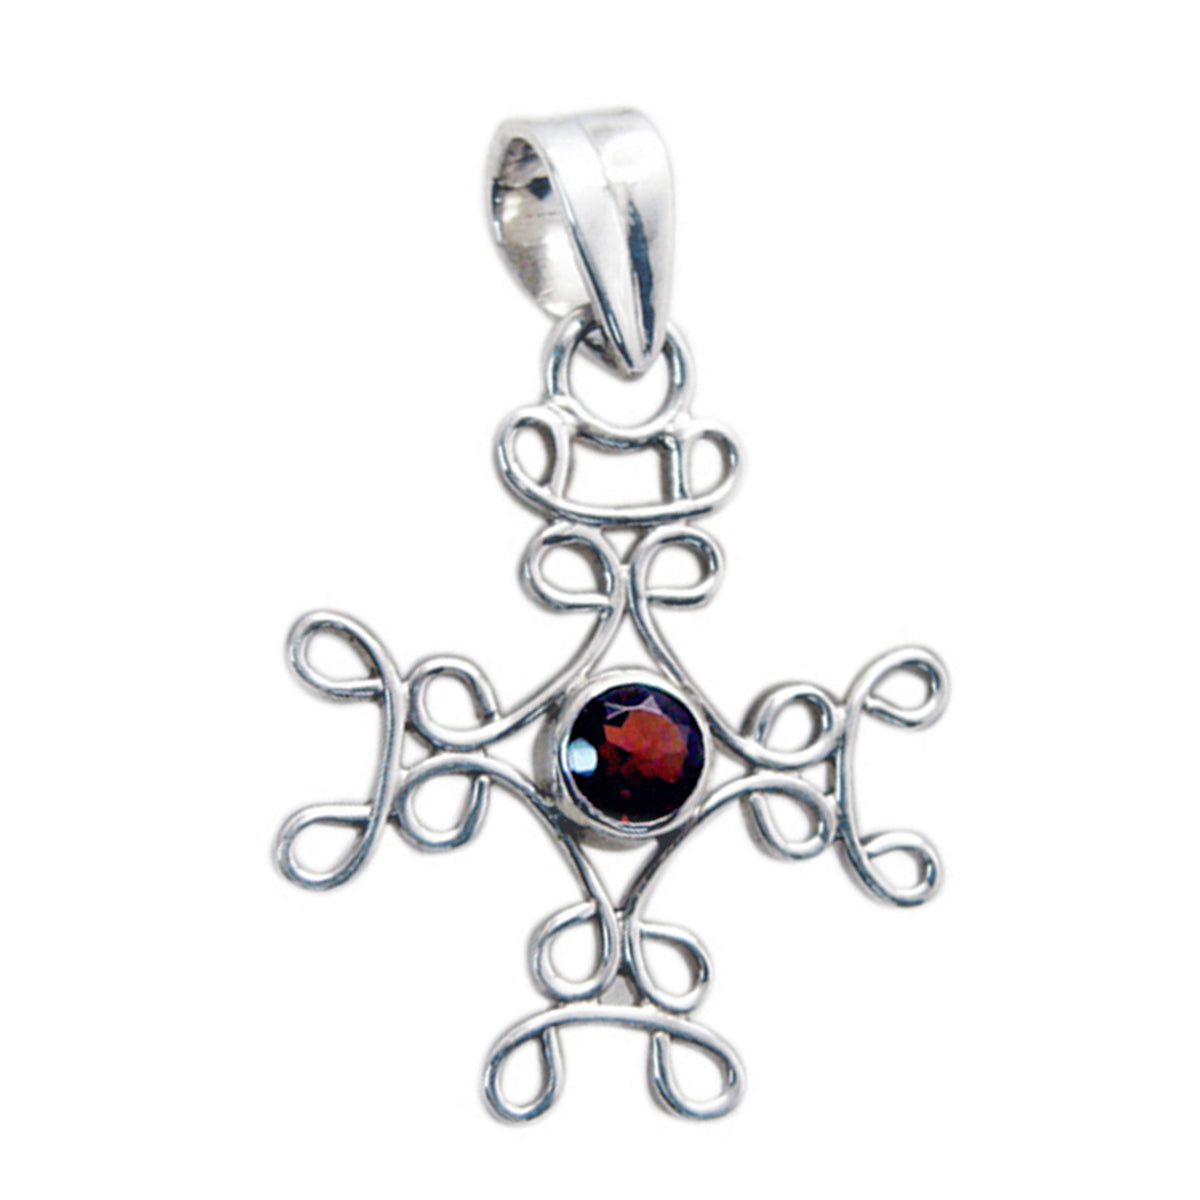 Riyo Drop Gems Round Faceted Red Garnet Solid Silver Pendant Gift For Good Friday